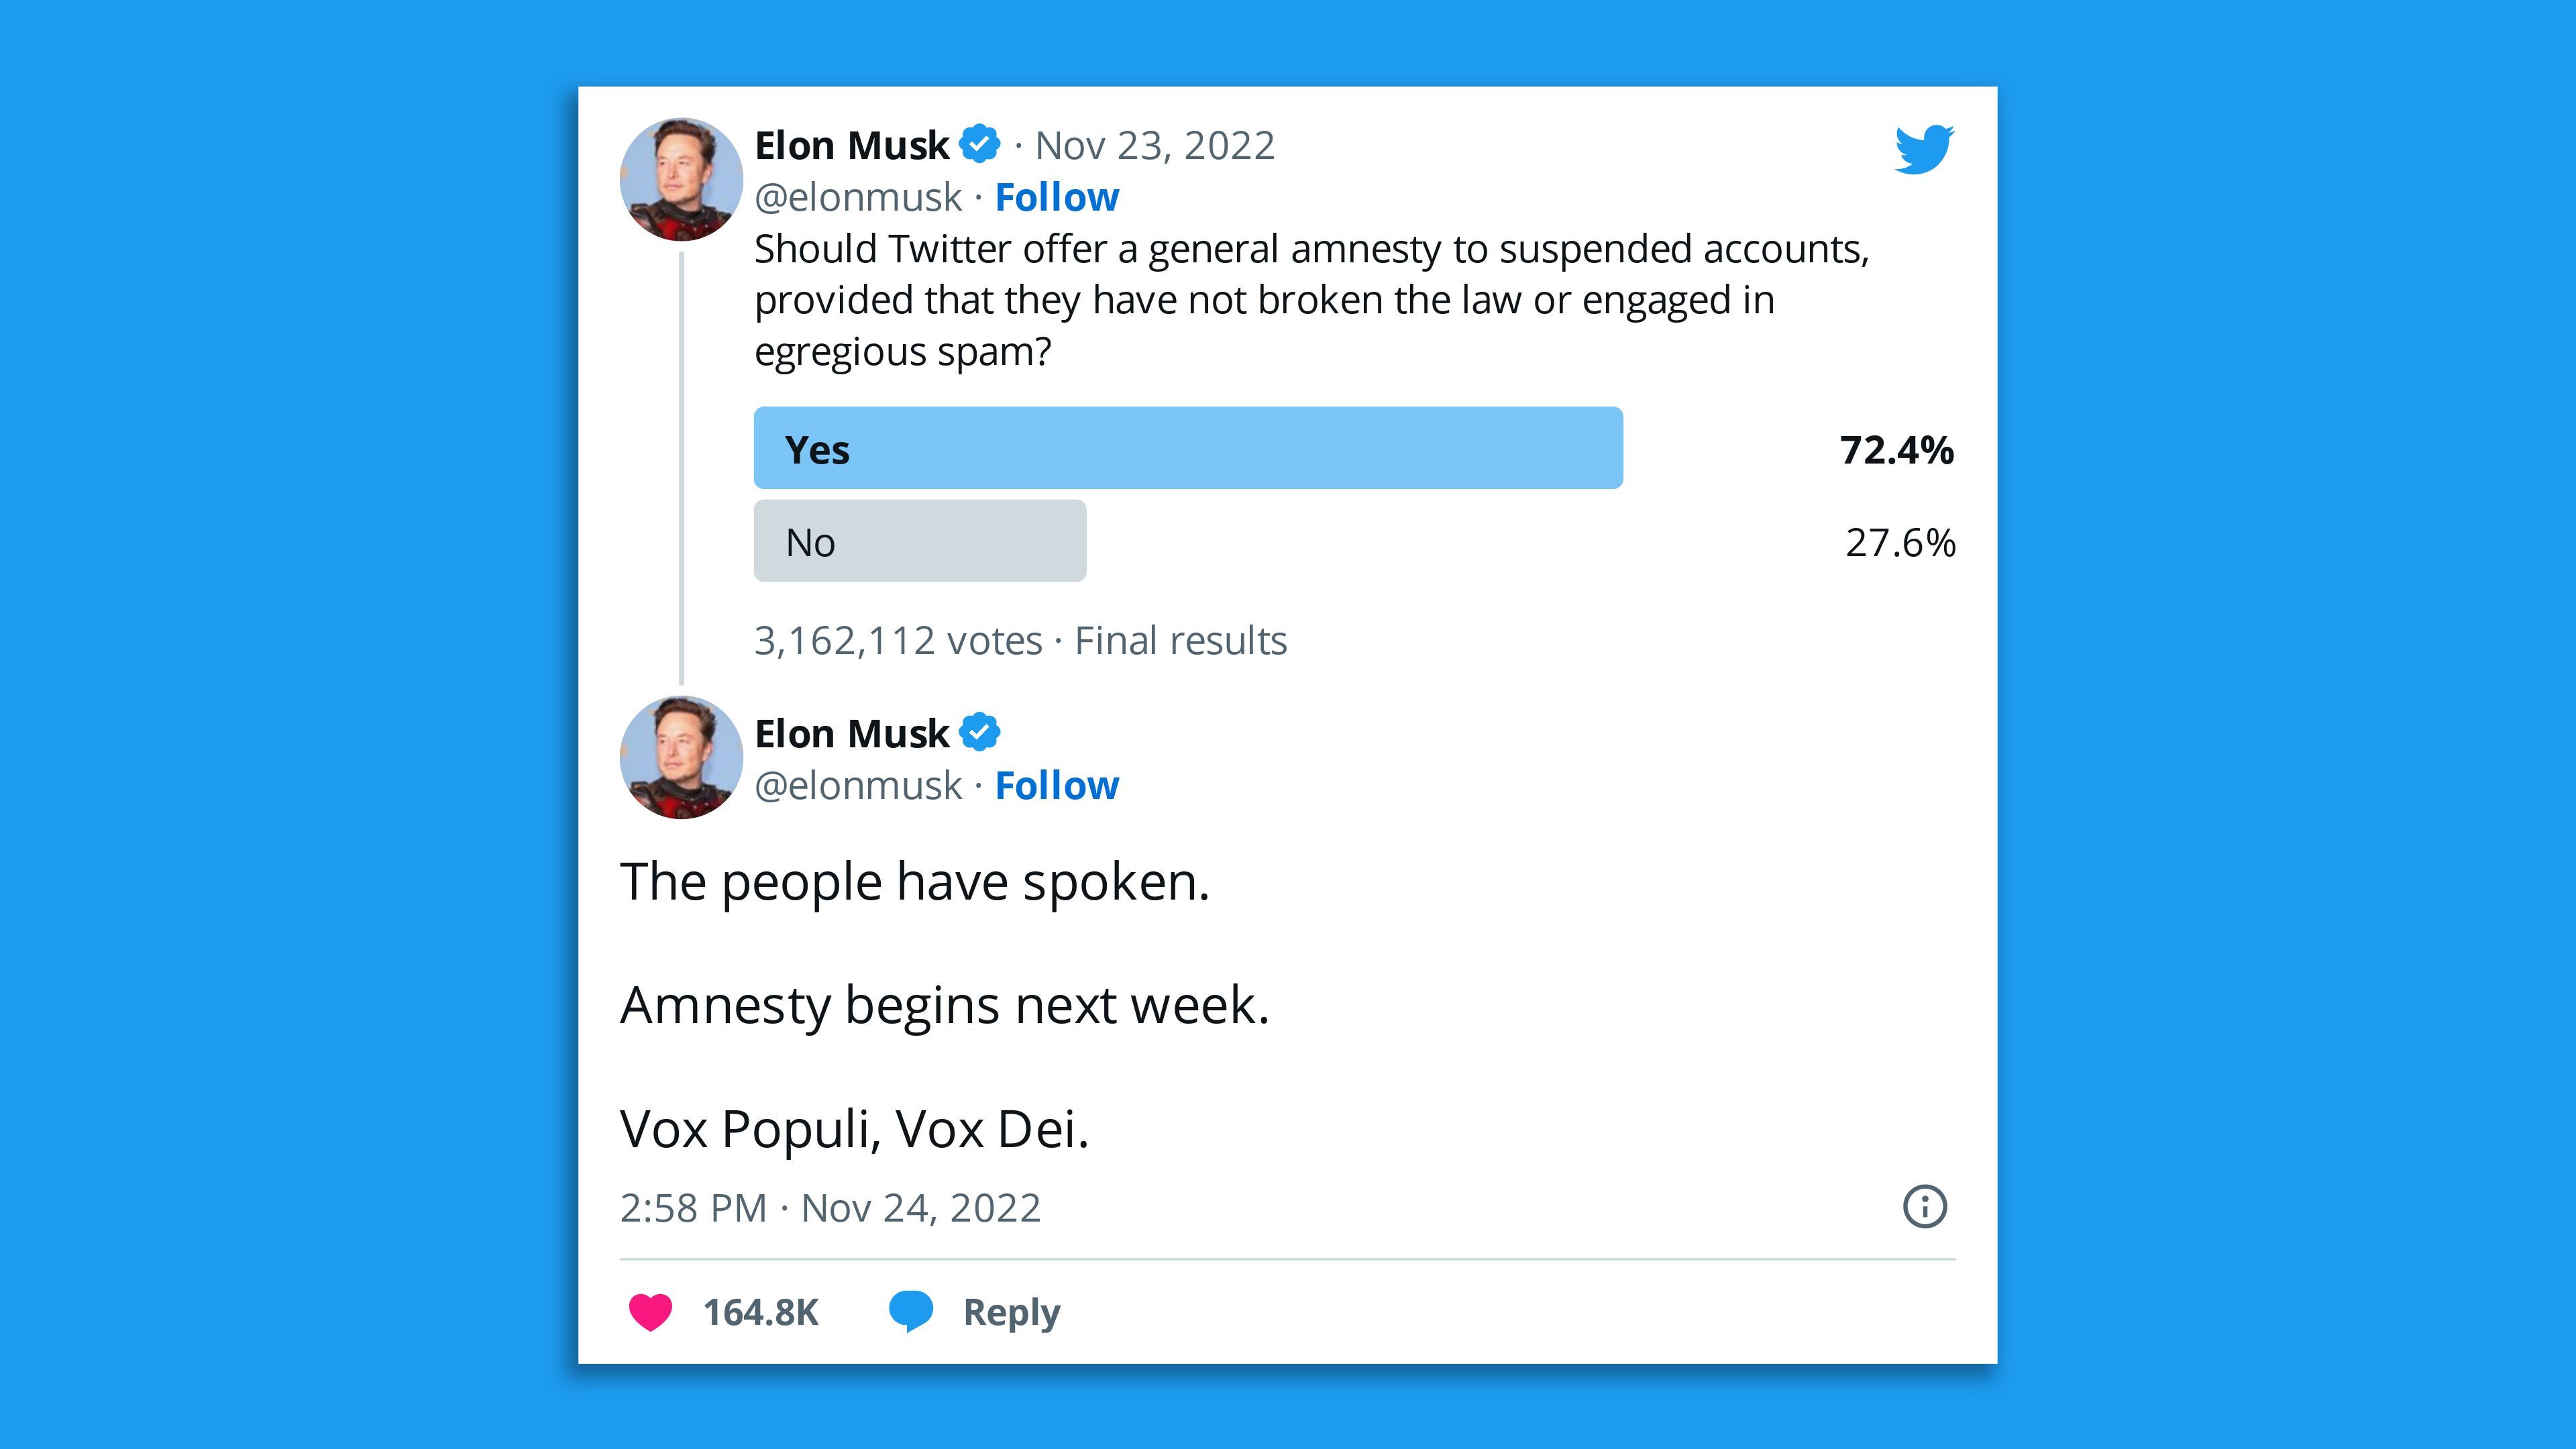 A screenshot of an Elon Musk tweet saying "the people have spoken" after his unscientific poll results showed most who voted wanted an amnesty for suspended Twitter accounts.